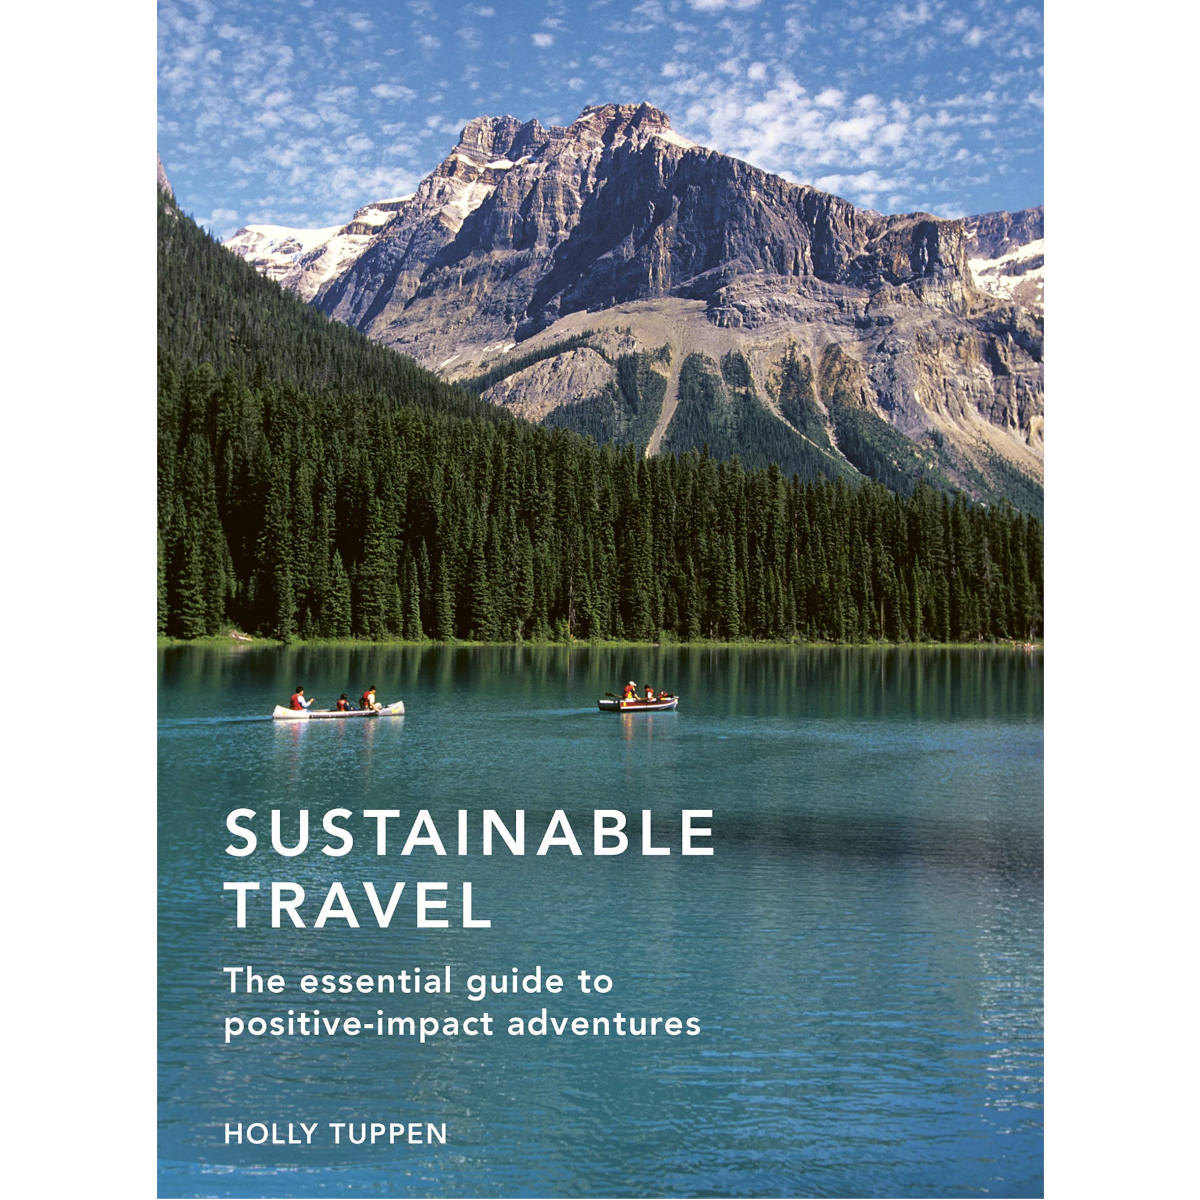 Sustainable Travel: The Essential Guide to Positive Impact Adventures